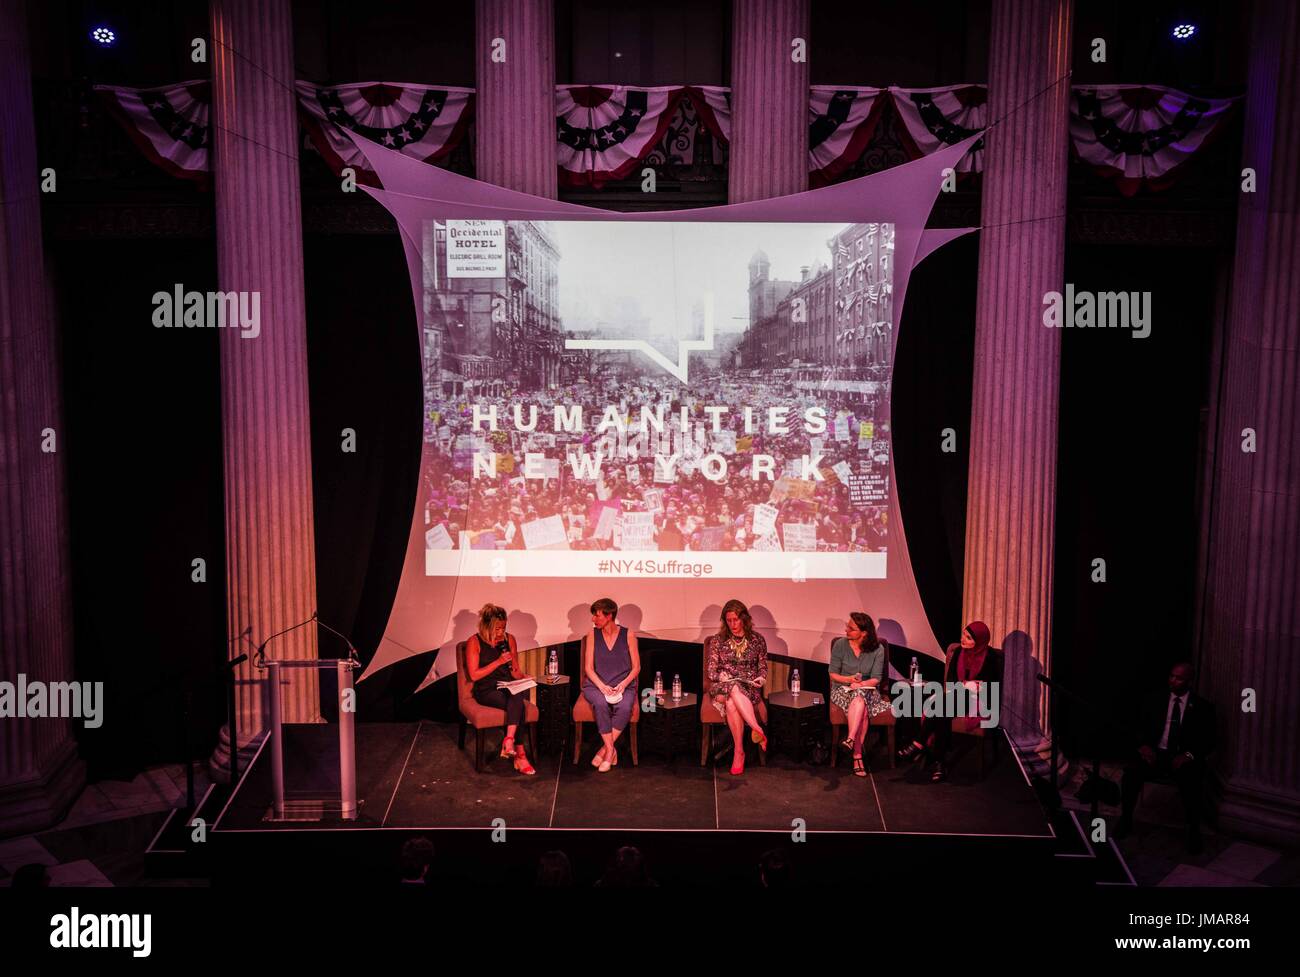 New York, USA. 26th July, 2017. Led by the endowment foundation Humanities New York, a celebration of the centennial of Women's Suffrage was organized at Federal Hall in NYC under the title of 'Beyond the Ballot: From Suffrage to the Women's March''. In the course of the event, a roundtable involving women from journalism, history, and community organizing discussed such themes as the Suffrage movement, the 19th Amendment, and what's next for women. The event was moderated by Jia Tolentino of the New Yorker. Credit: ZUMA Press, Inc./Alamy Live News Stock Photo